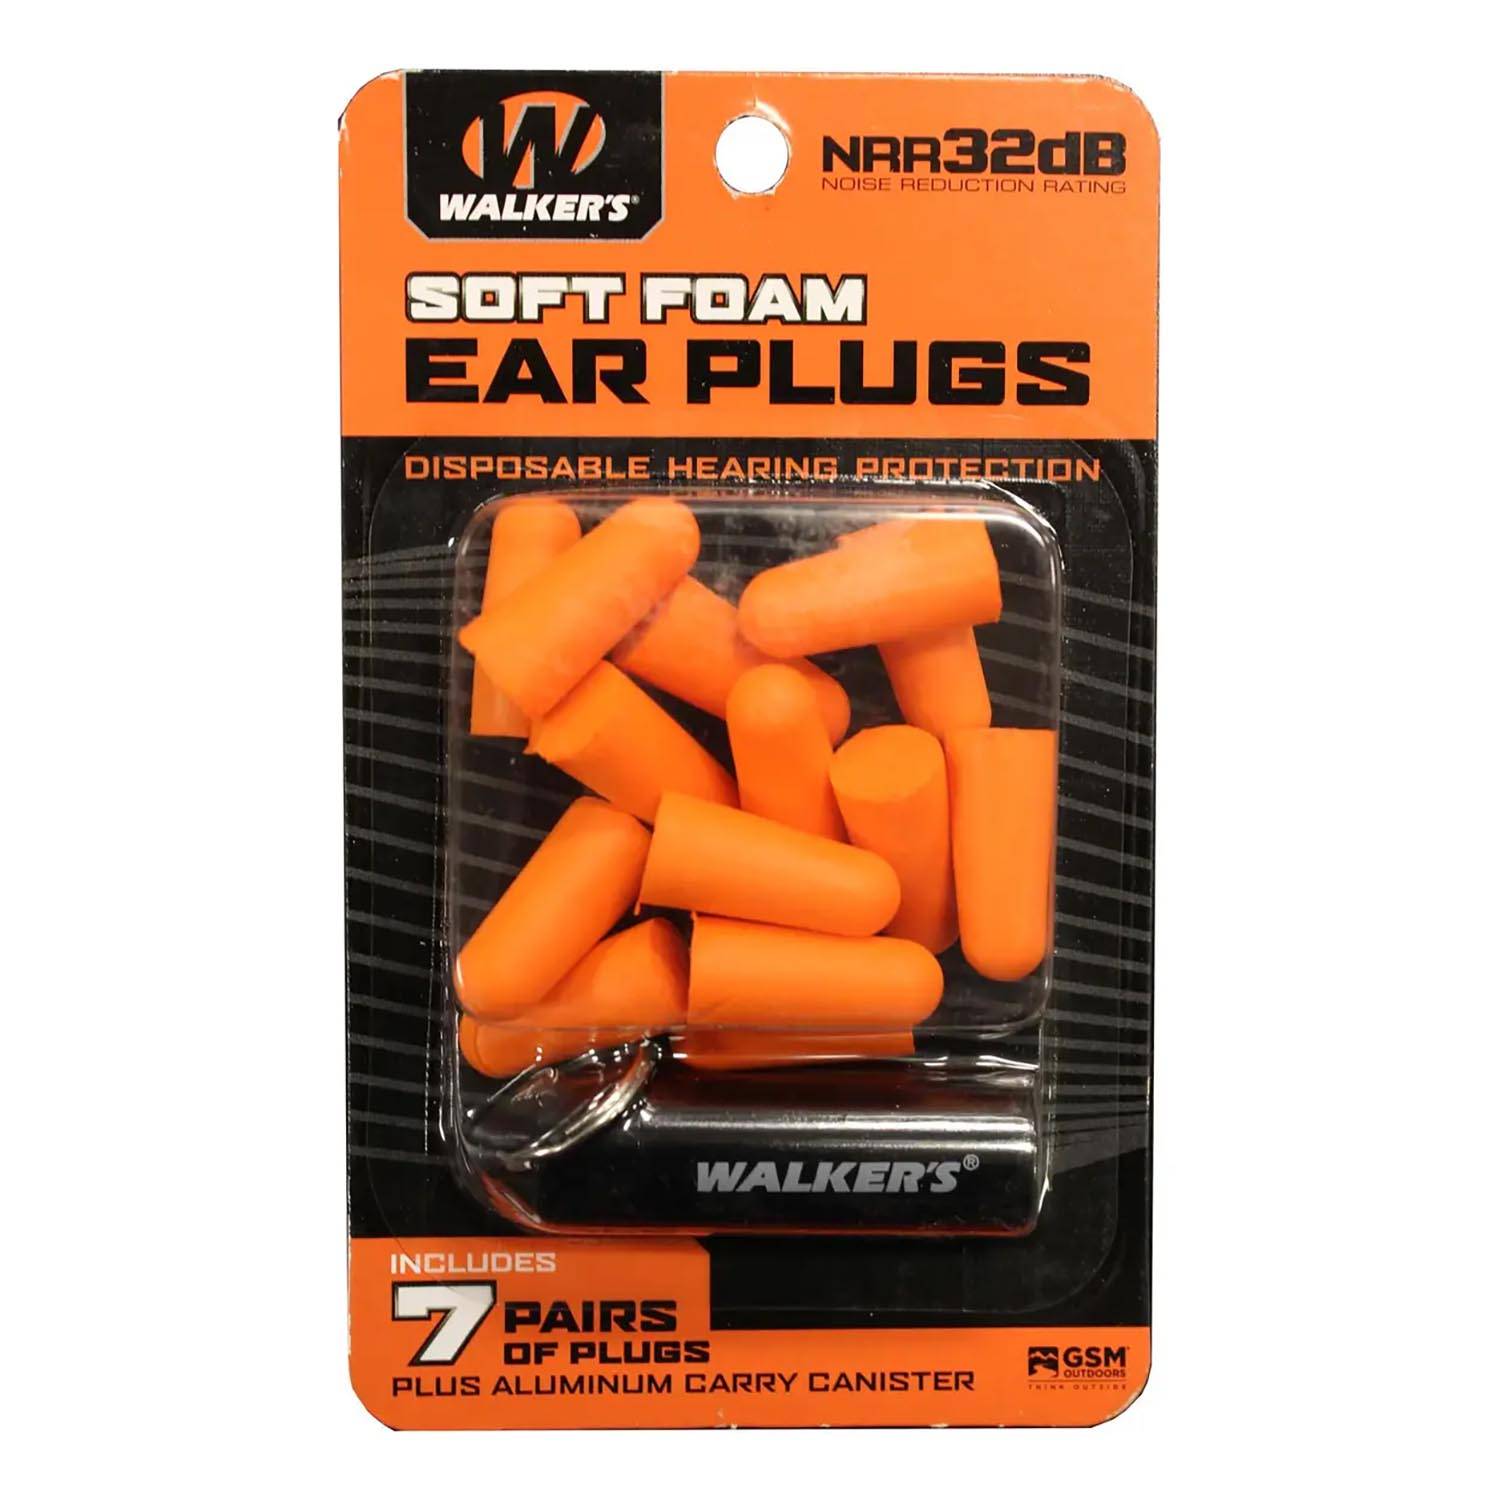 WALKER'S FOAM PLUGS WITH ALUMINUM CARRY CANISTER, 7 PAIRS